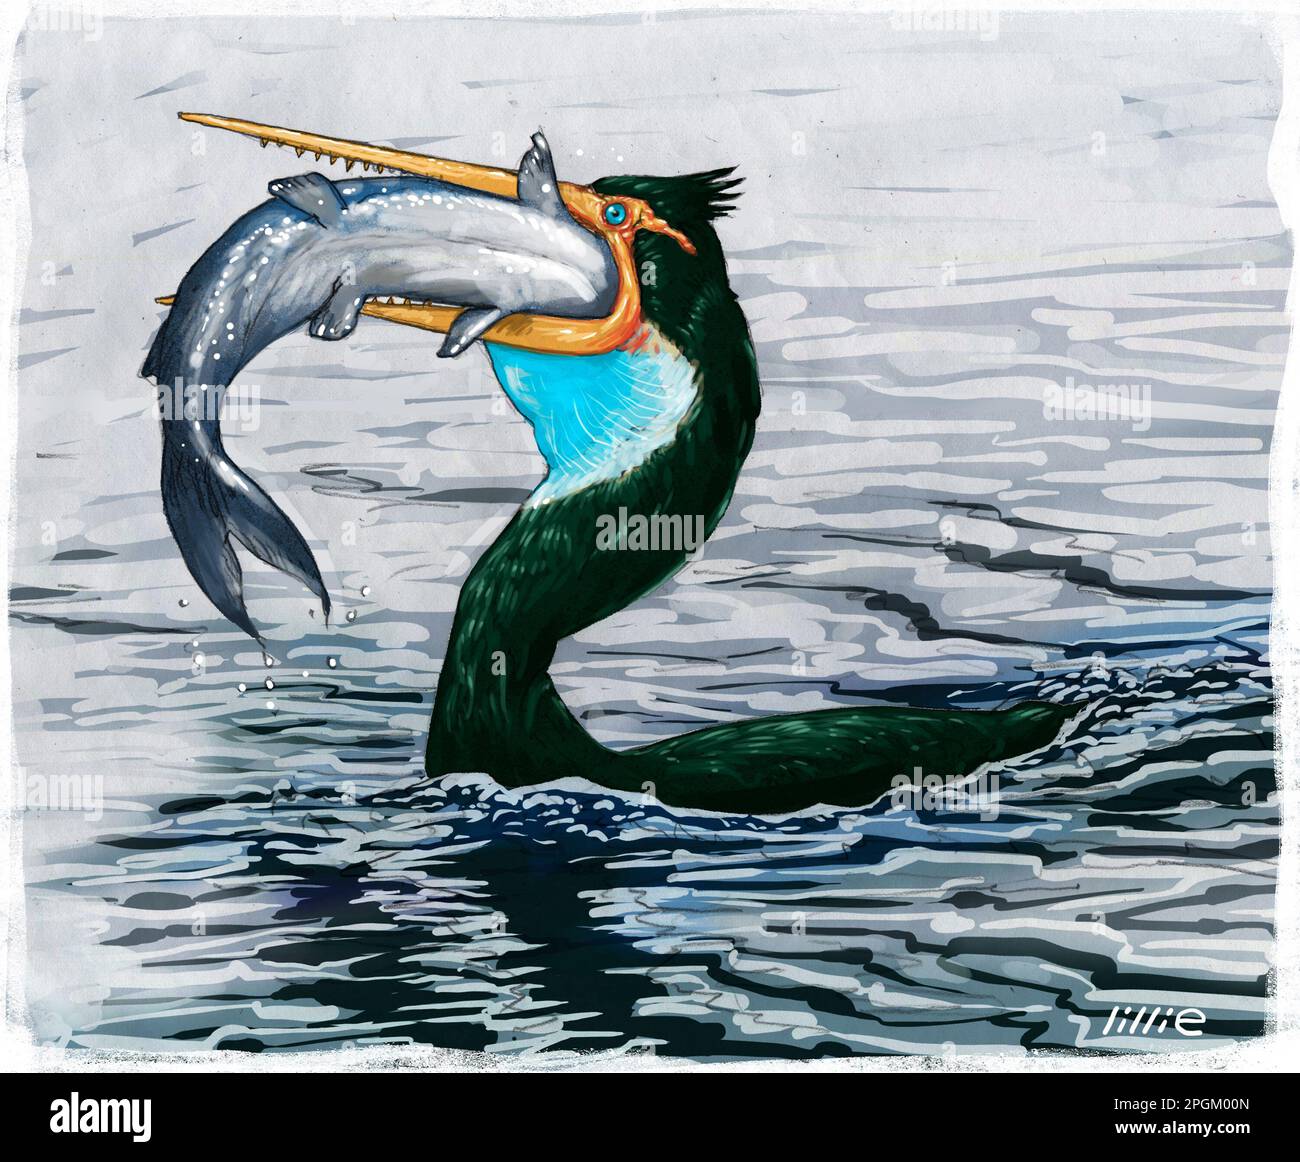 Artist's impression/ illustration of Hesperornis (meaning western bird), a genus of cormorant-like bird from the Campanian age of the Late Cretaceous. Stock Photo